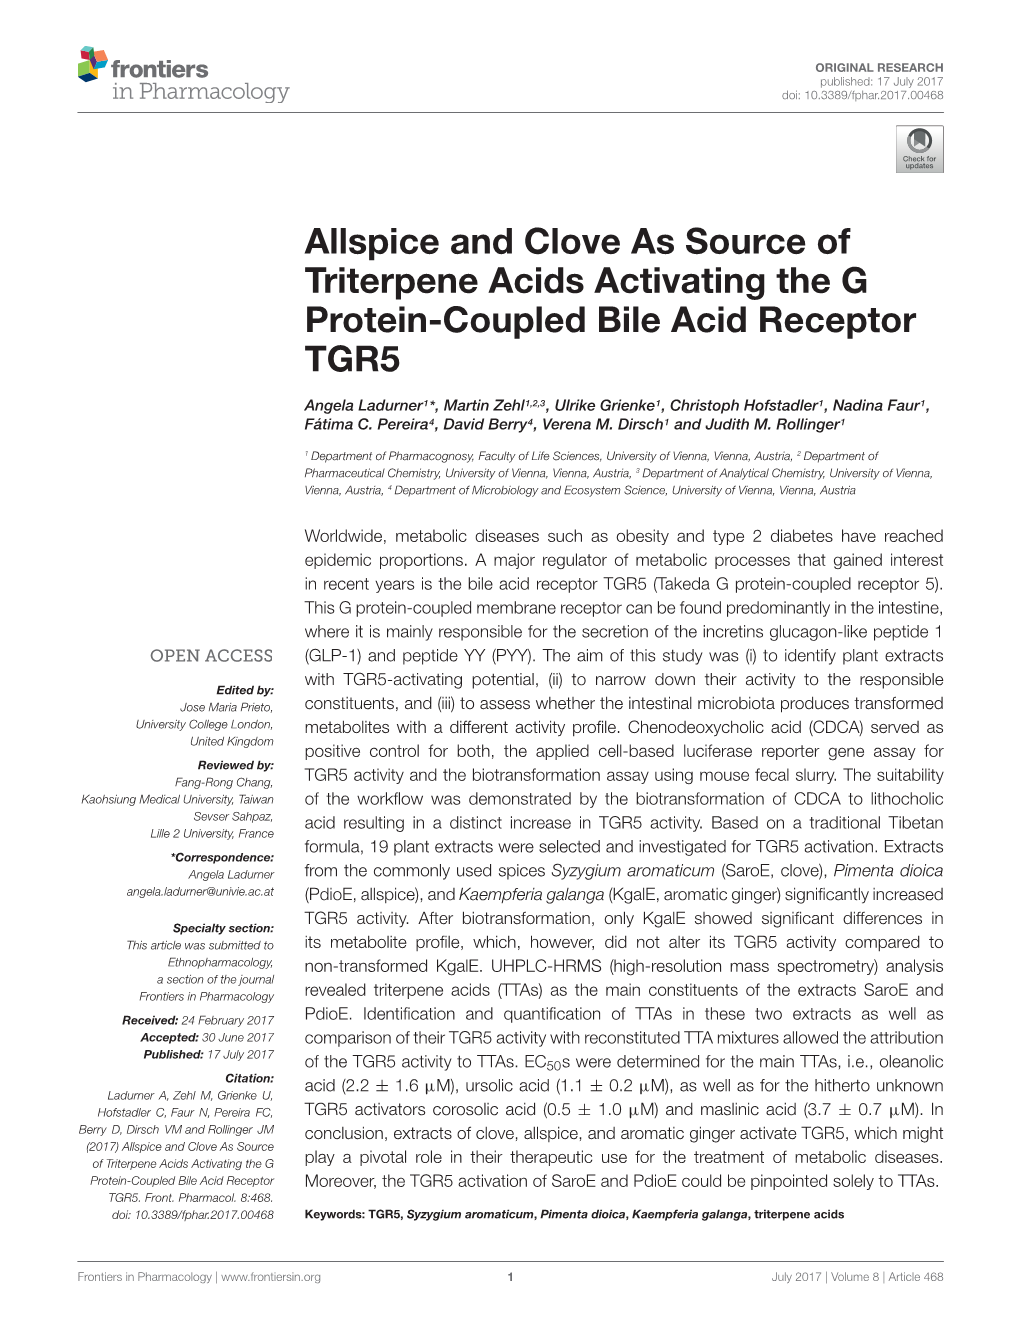 Allspice and Clove As Source of Triterpene Acids Activating the G Protein-Coupled Bile Acid Receptor TGR5